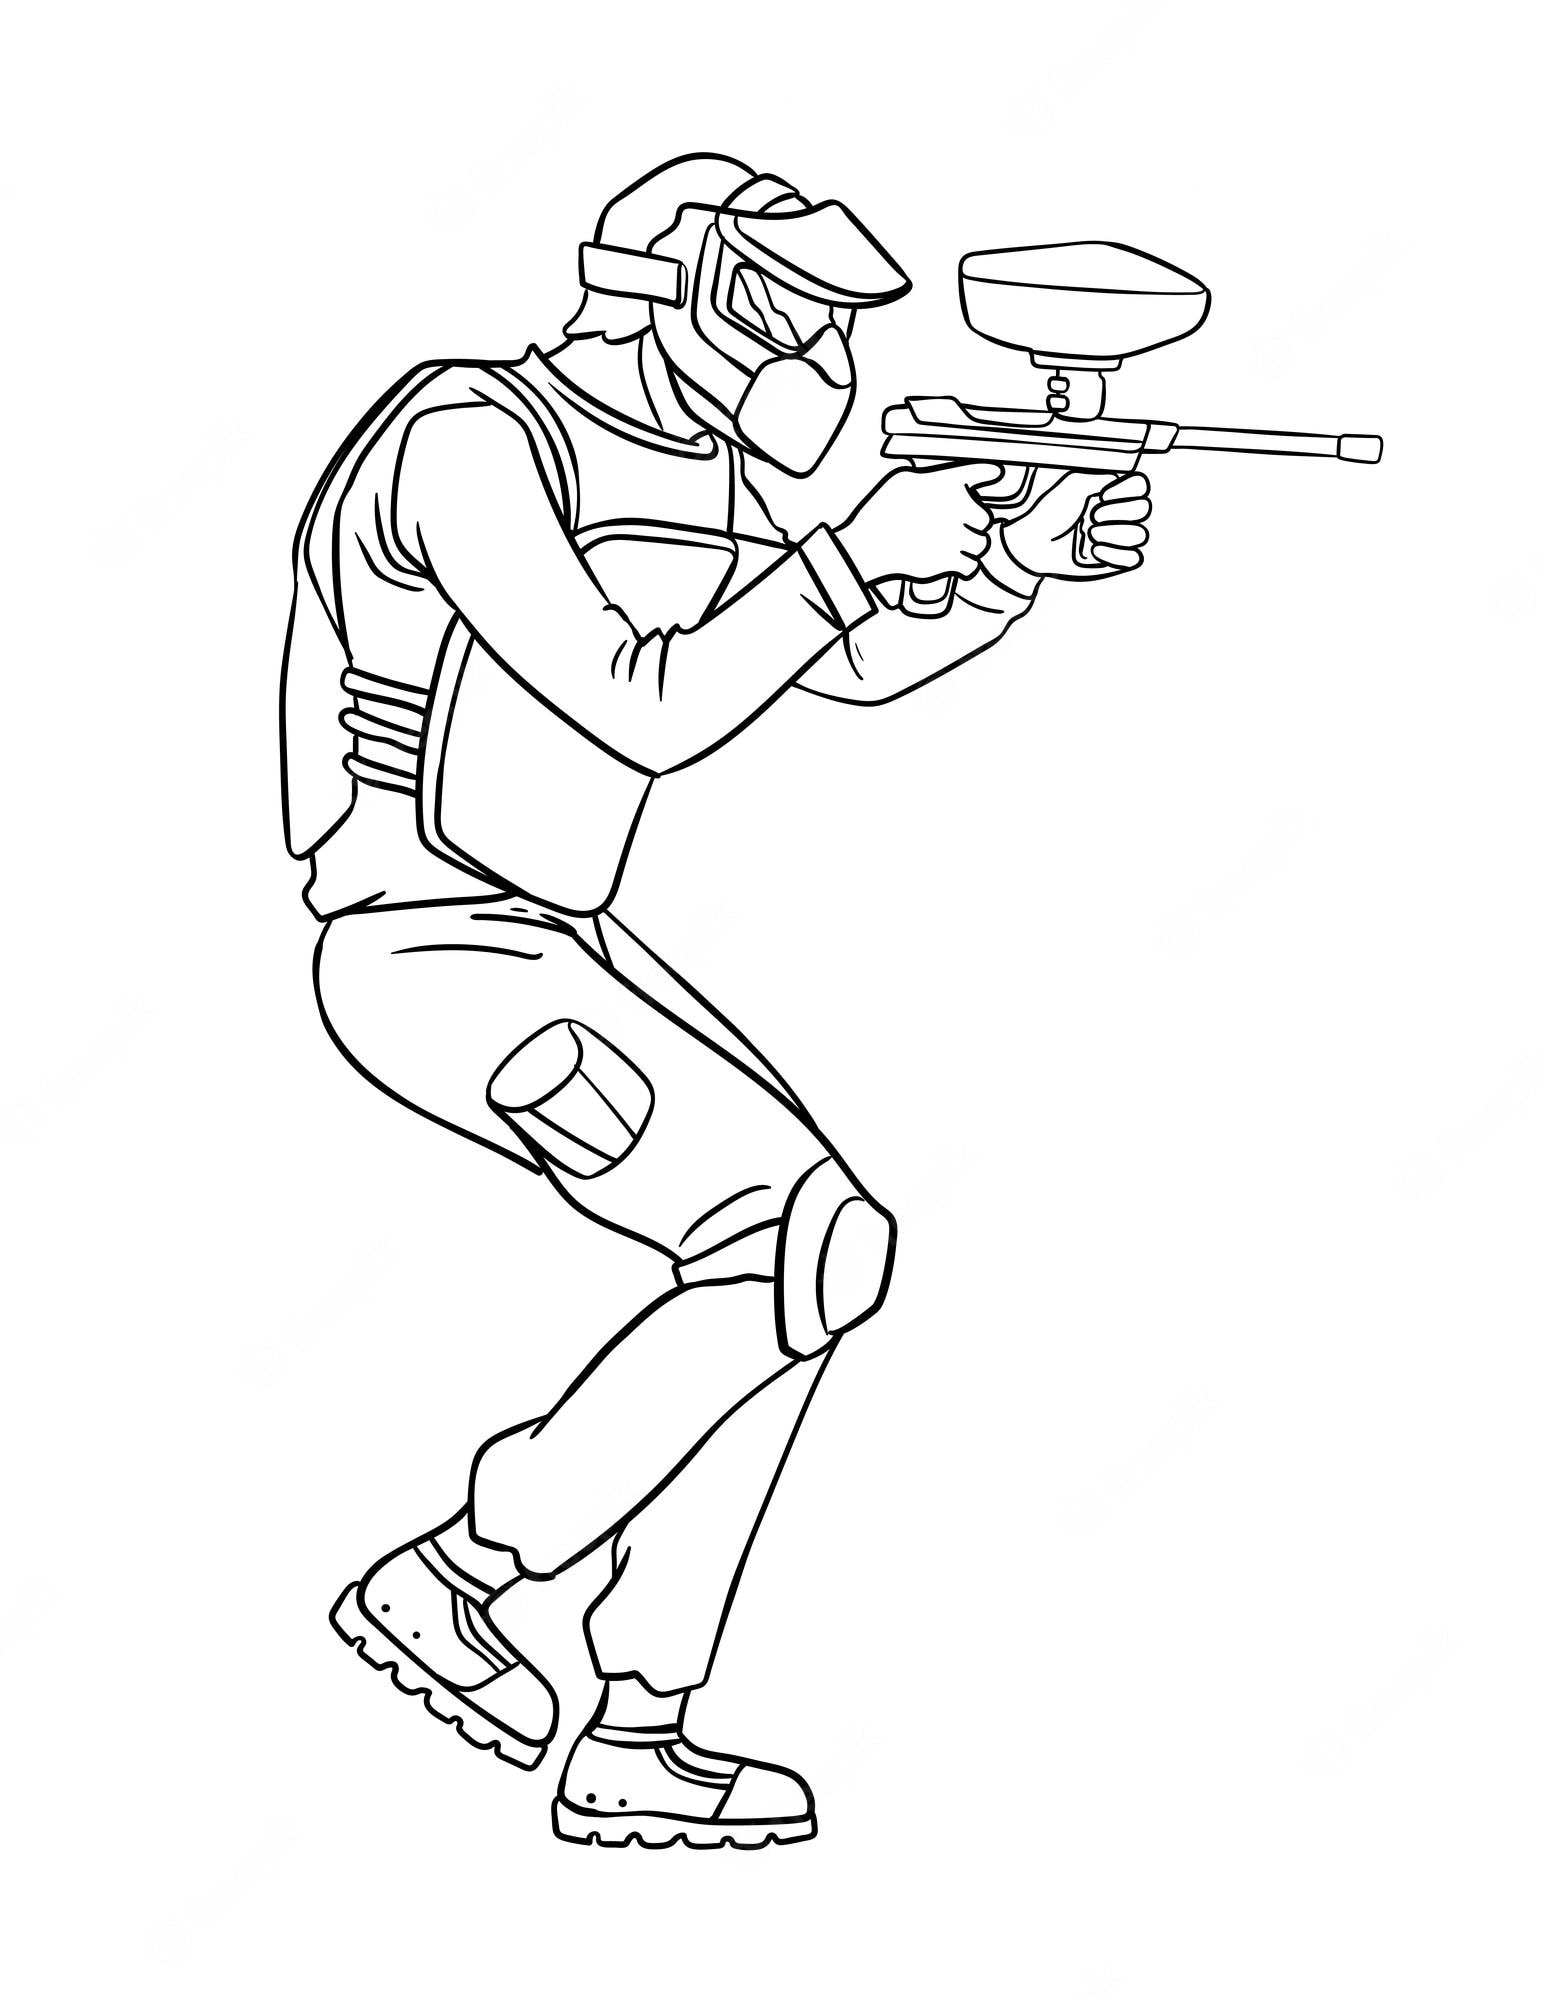 Premium Vector | Paintballer isolated coloring page for kids